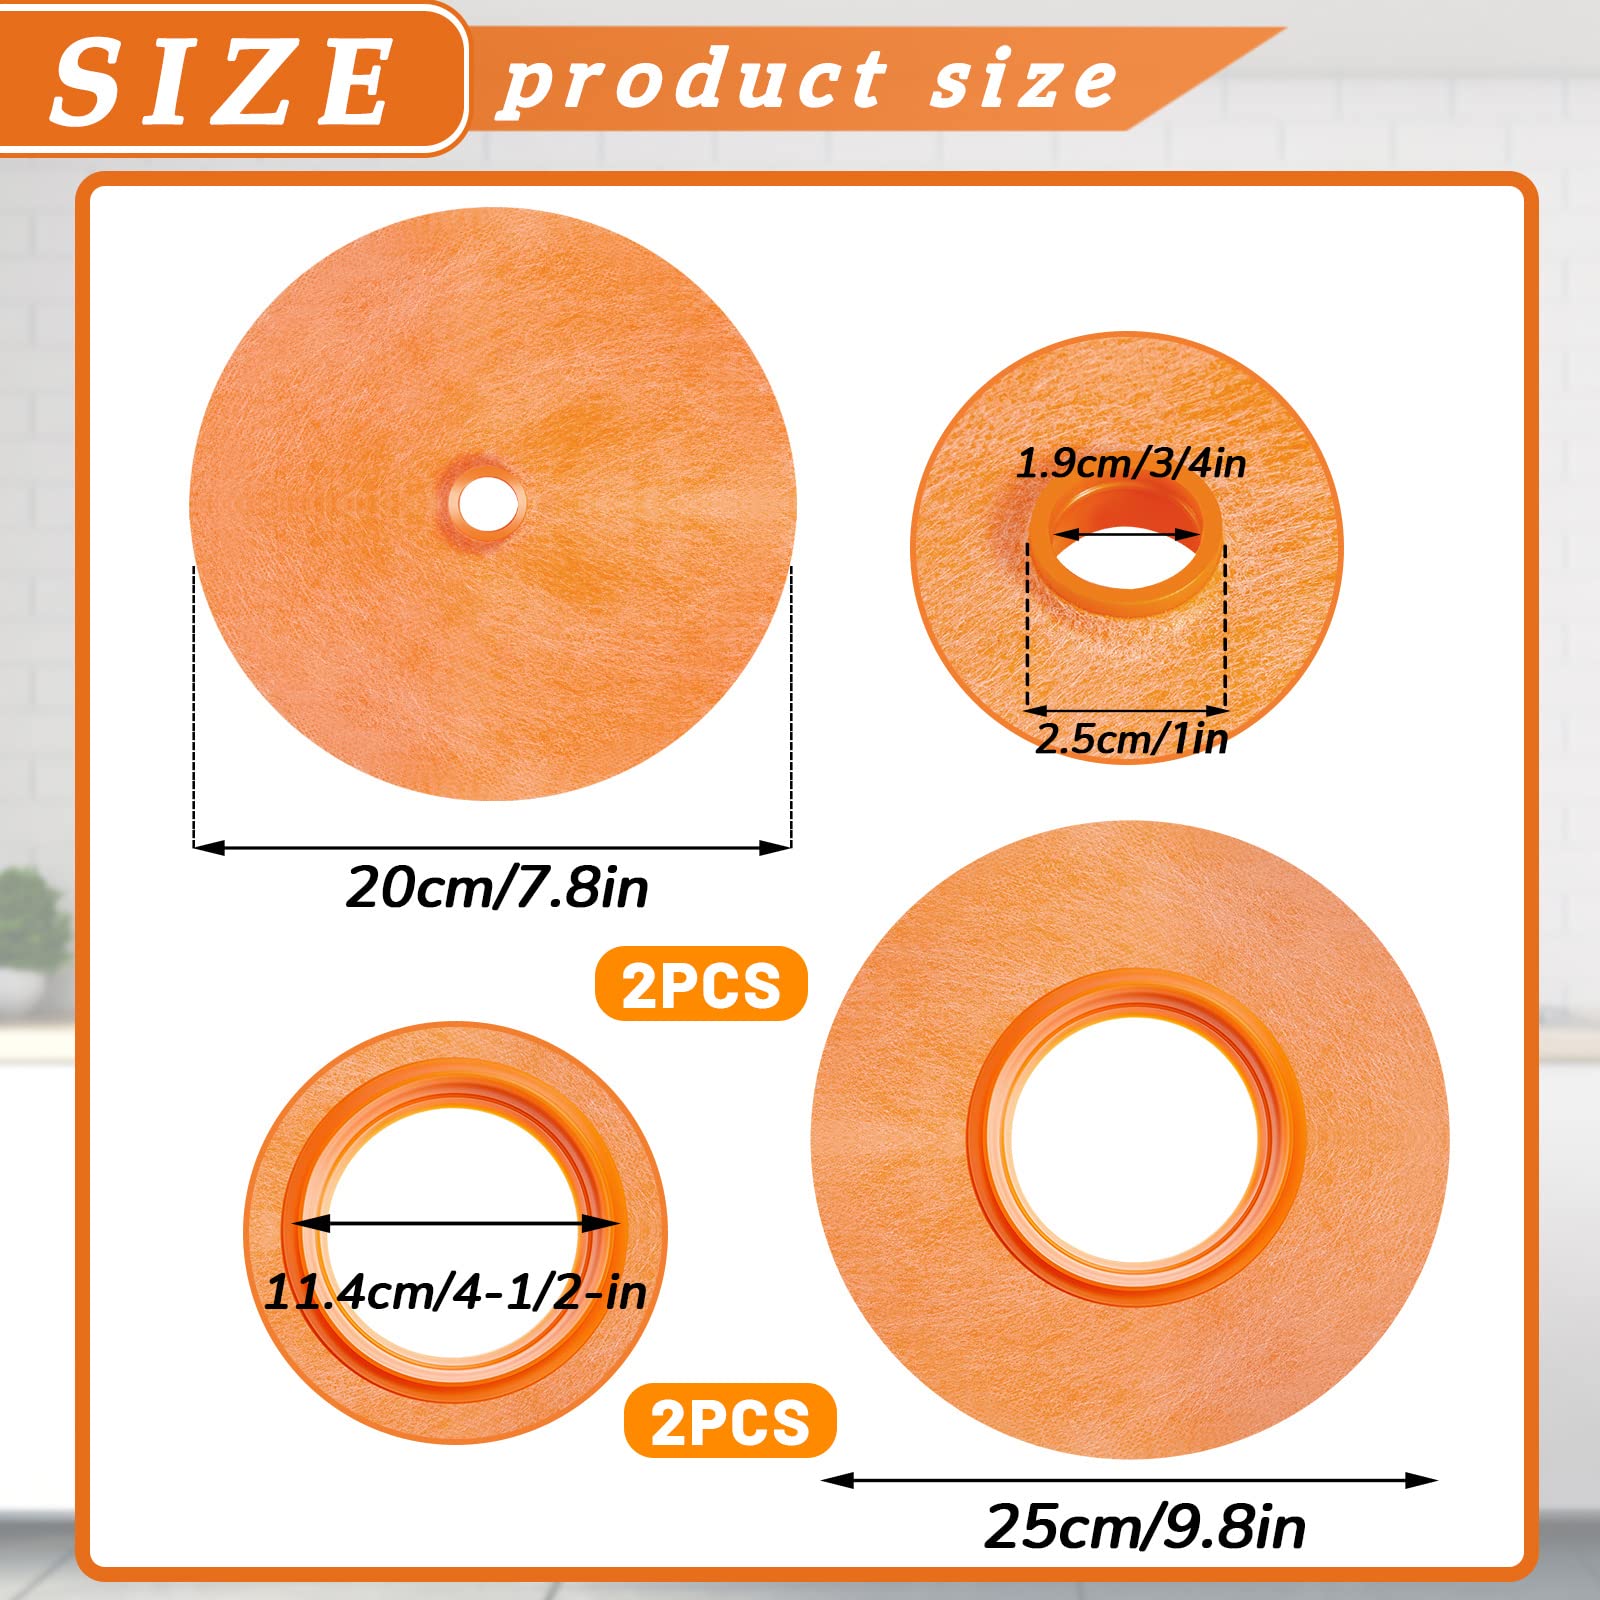 4 Pcs Pipe Valve Gasket Kit Includes Mixing Valve Seal 4-1/2 Inch and Pipe Seal 3/4 Inch Opening, Waterproofing Round Pipe Gasket Seal for Shower Valve and Shower Head Gasket Seal